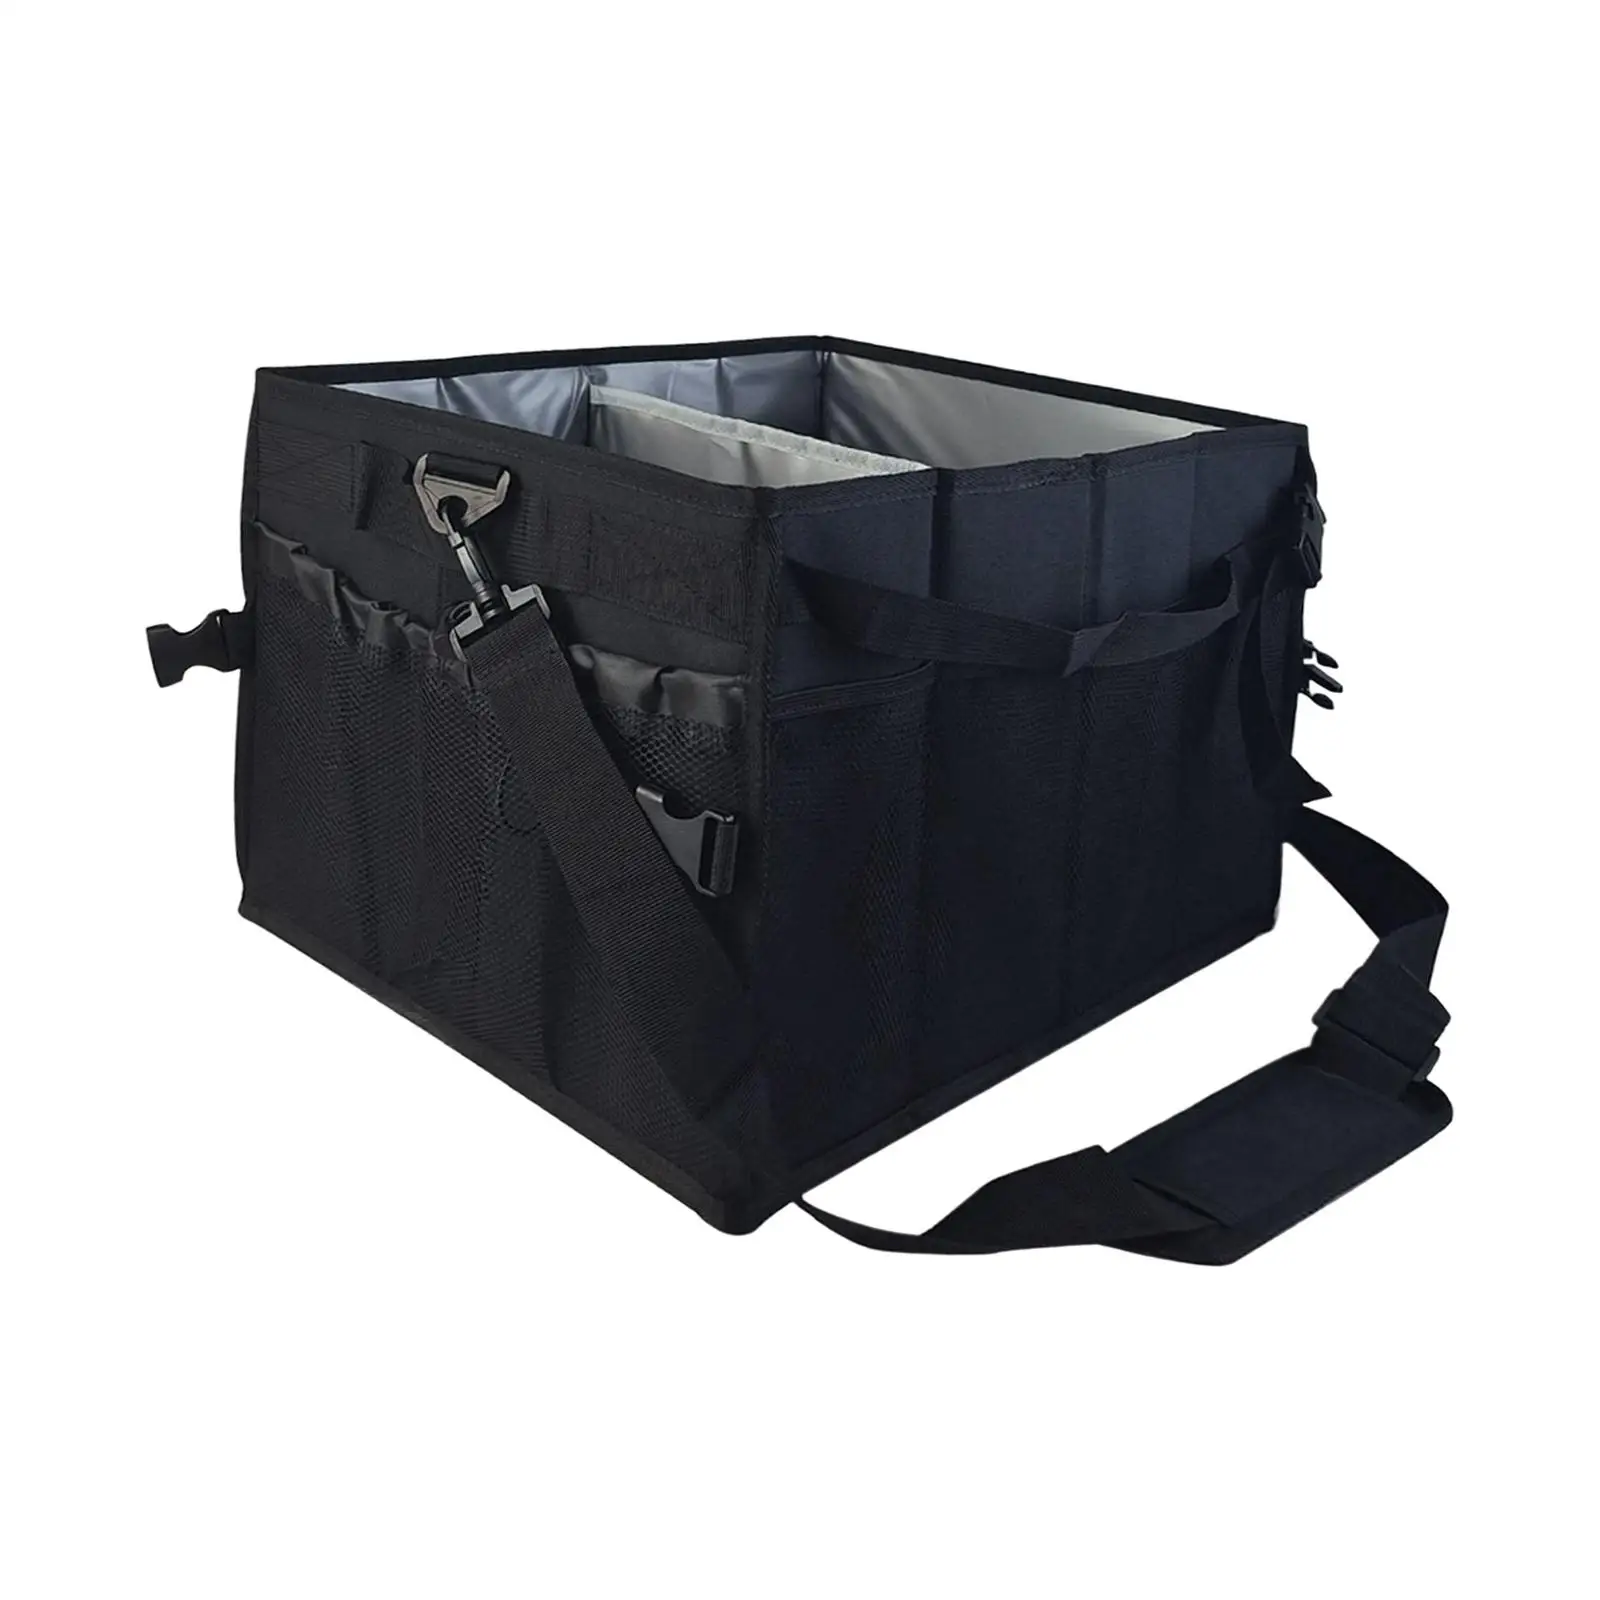 Foldable BBQ Tool Storage Bag Organizer Outdoor Picnic Cooking Tools Bag Waterproof for Outdoor Car Trip Picnic Travel Camping